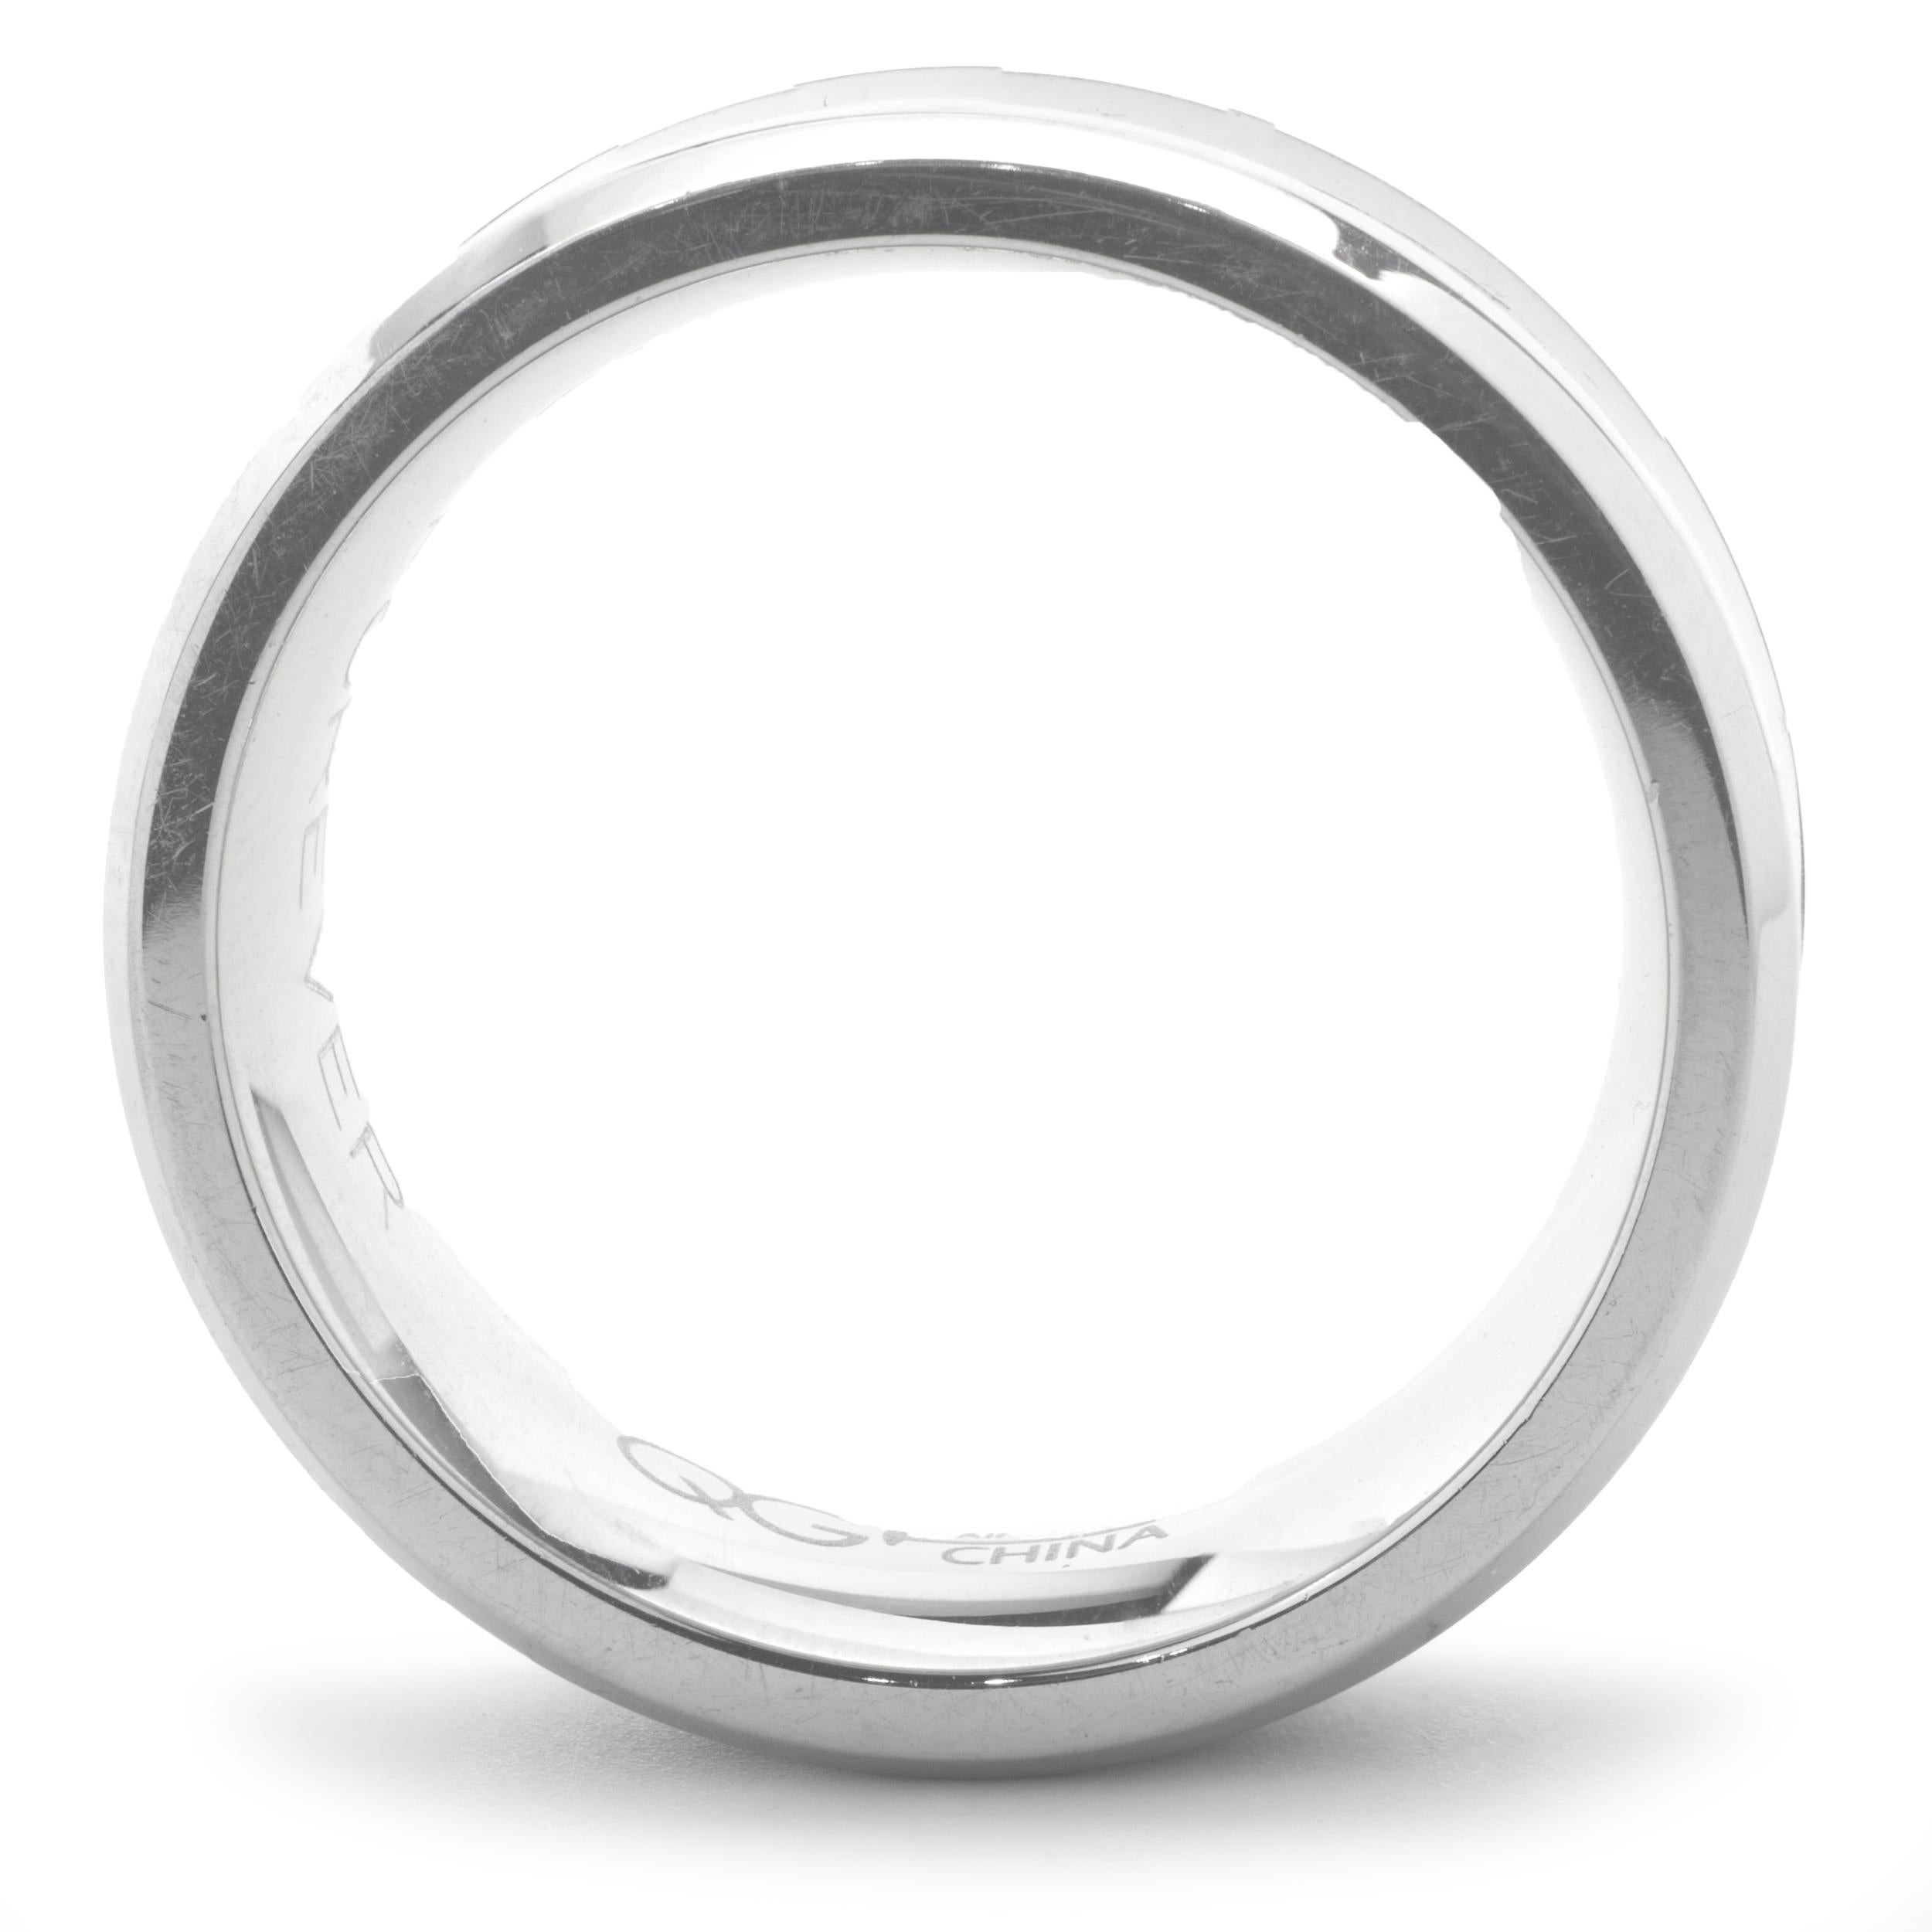 Designer: custom 
Material: Stainless Steel
Dimensions: band is 8mm wide 
Ring Size: 8.5
Weight: 6.55 grams
